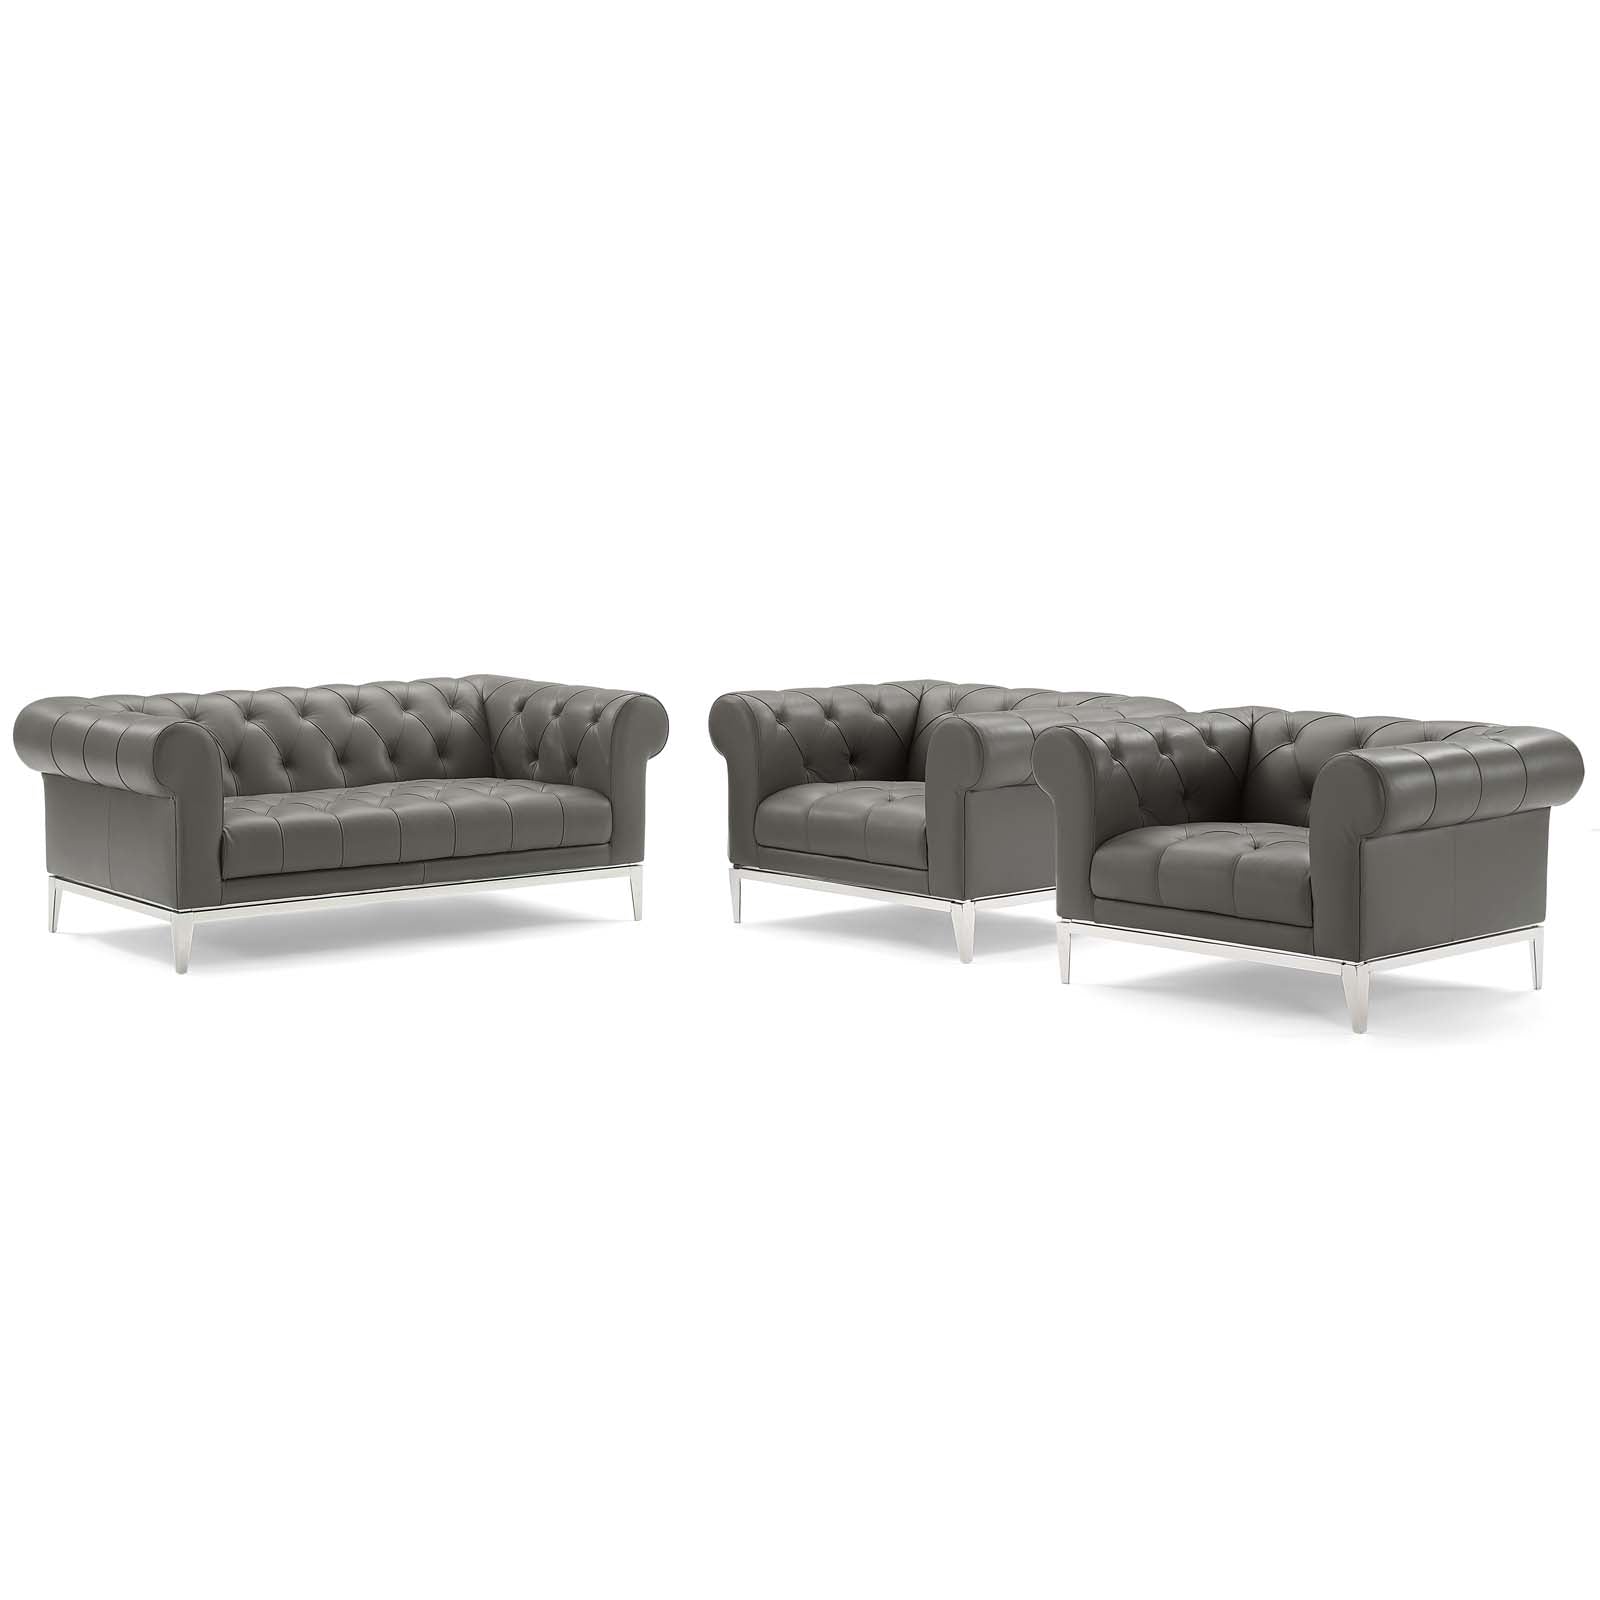 Idyll Tufted Upholstered Leather 3 Piece Set